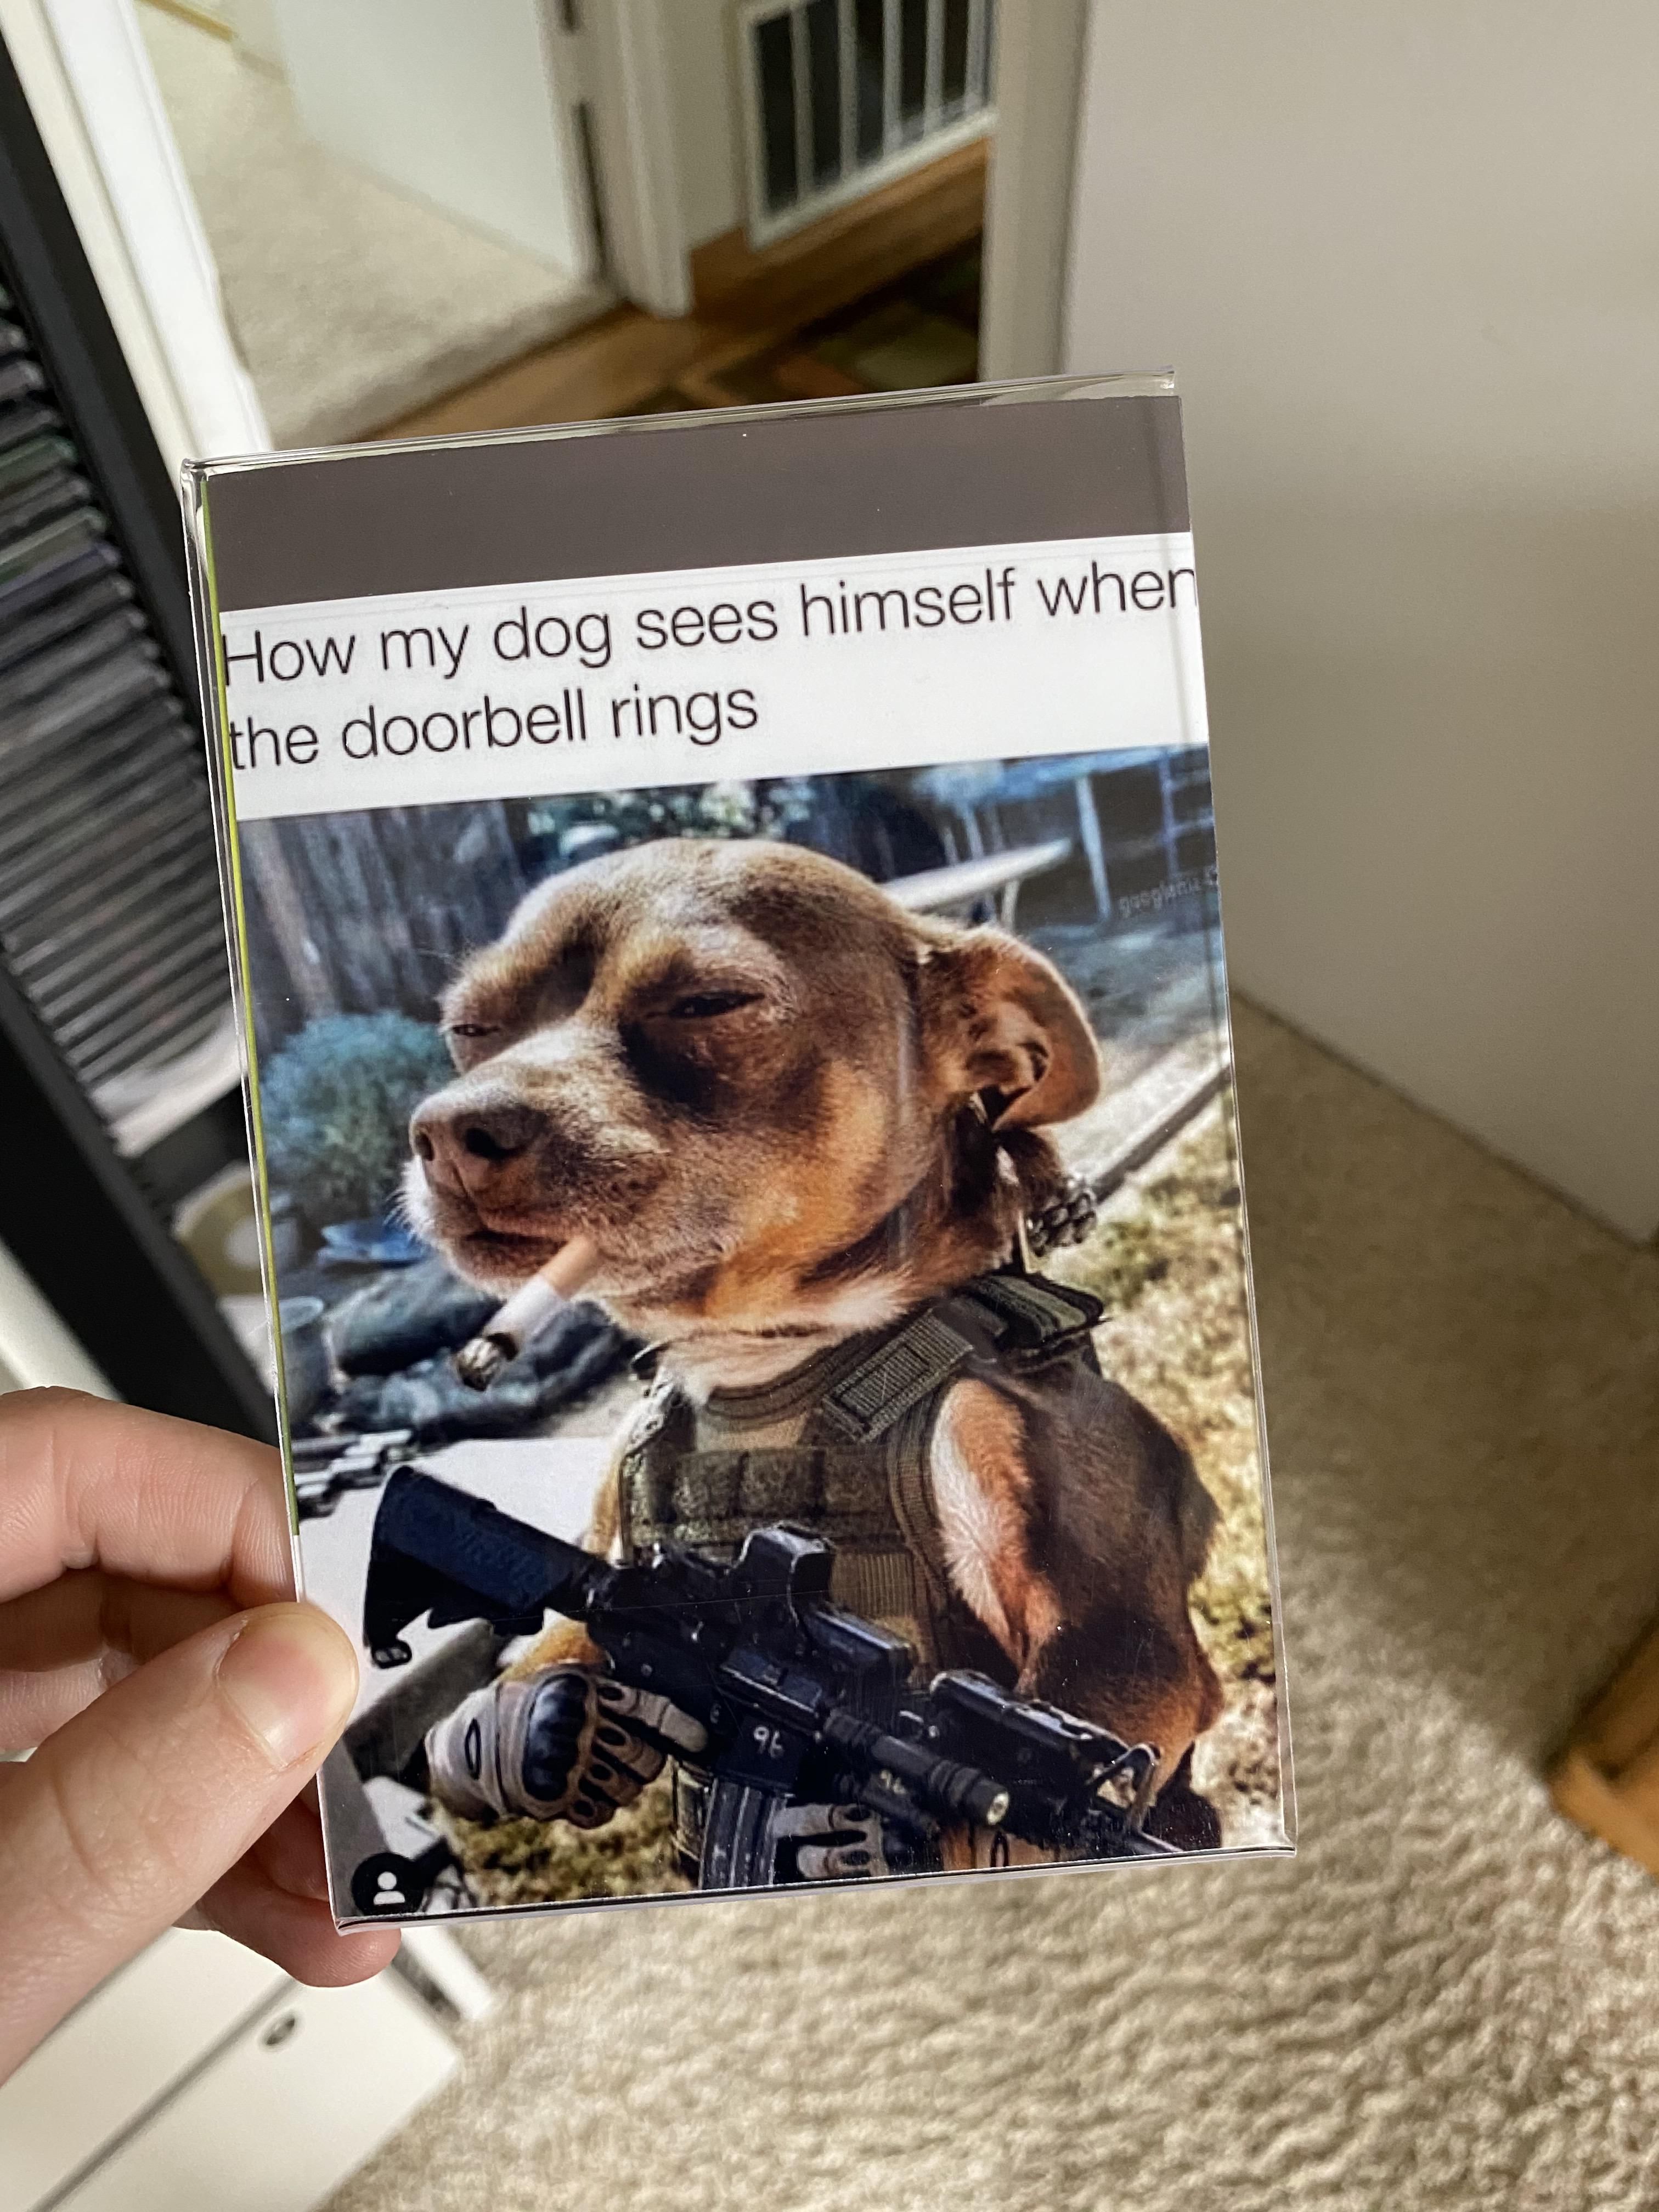 My grandpa’s friend sent him this picture and my grandpa decided to print AND frame it, thinking that it was his friends dog